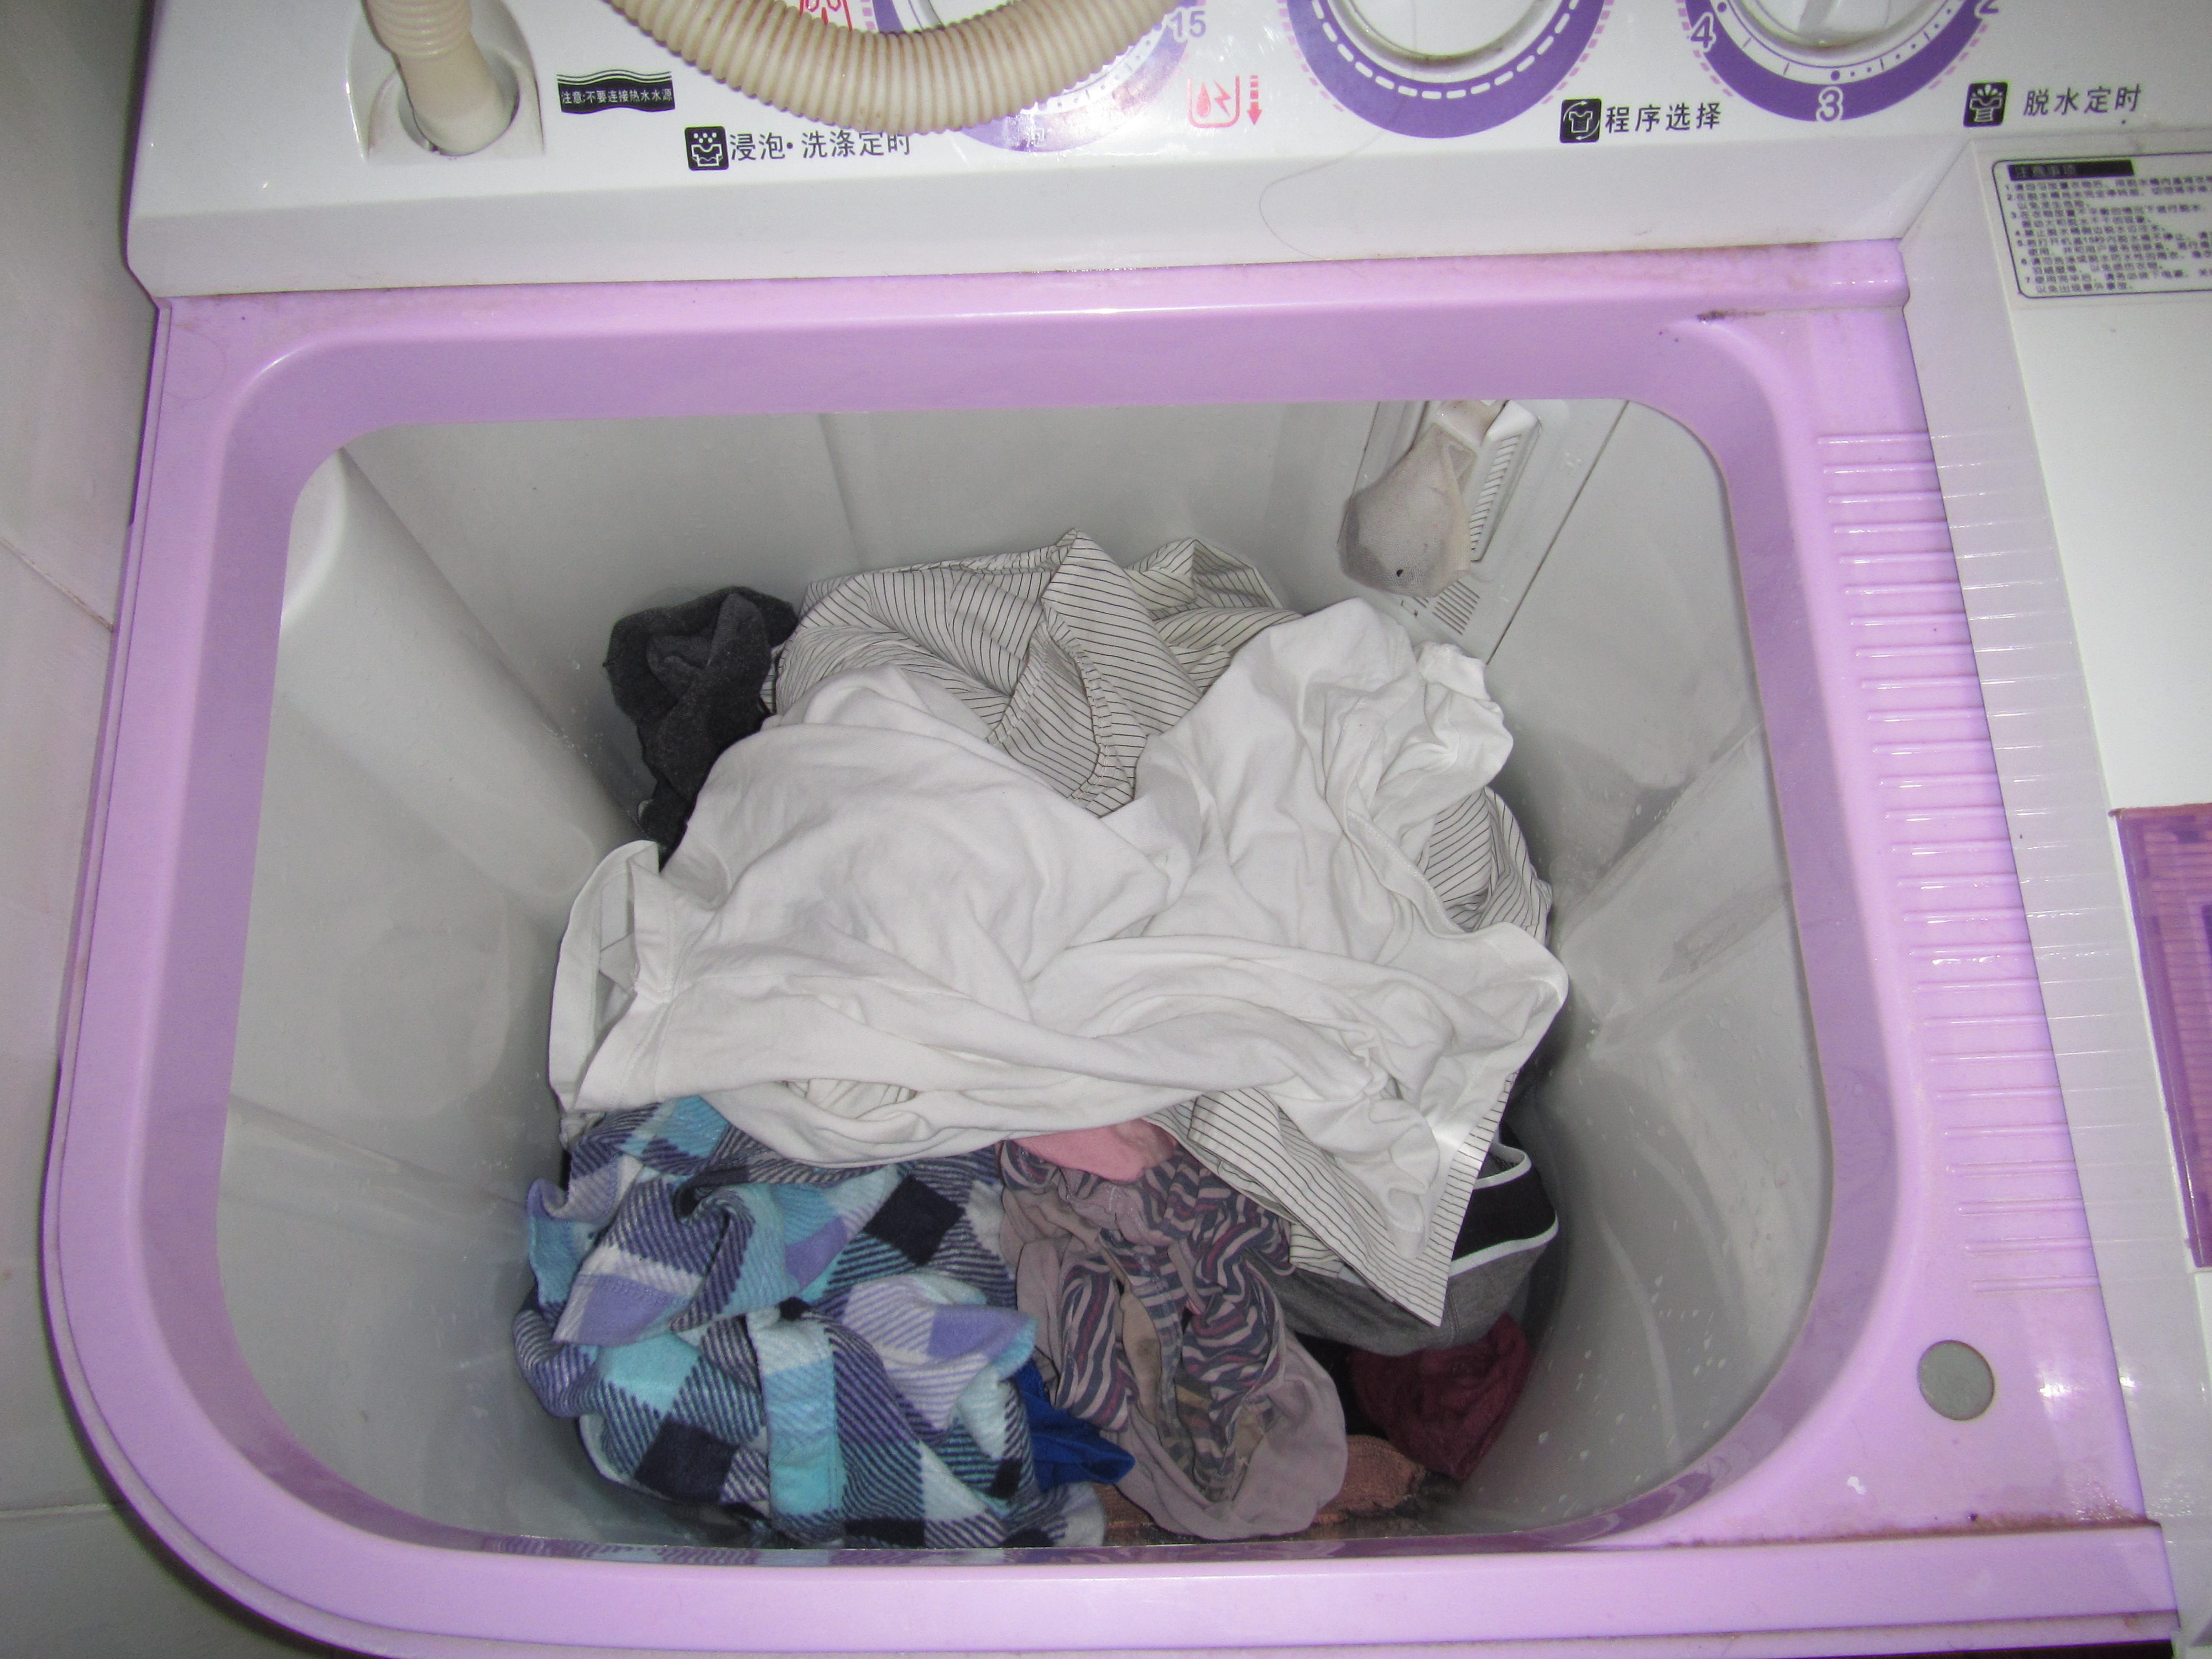 Step 5: Round up your clothes and throw them in the washing machine. Make sure that you don't throw in too much because the blue circle will only spin with a key amount of clothing in the washing machine